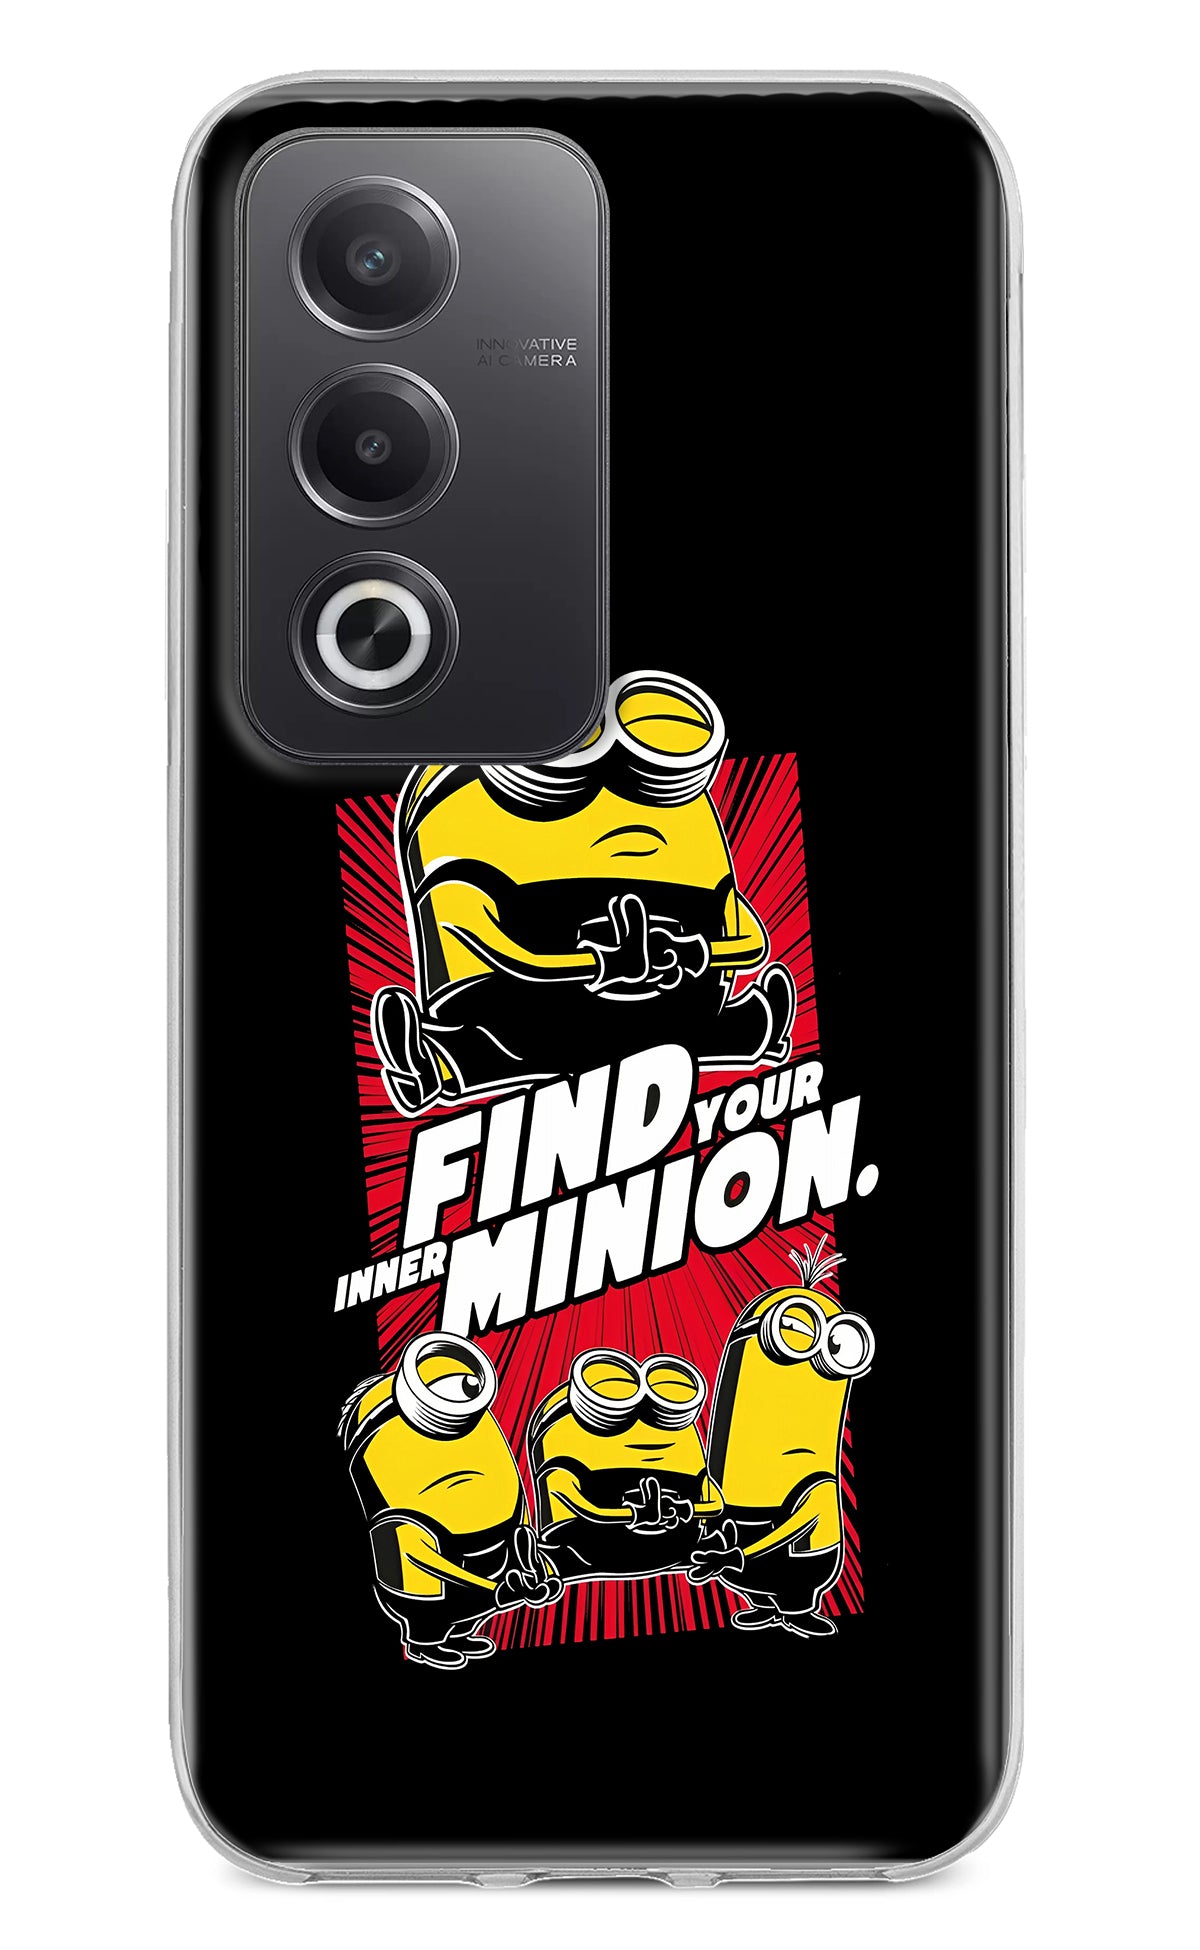 Find your inner Minion Oppo A3 Pro 5G Back Cover